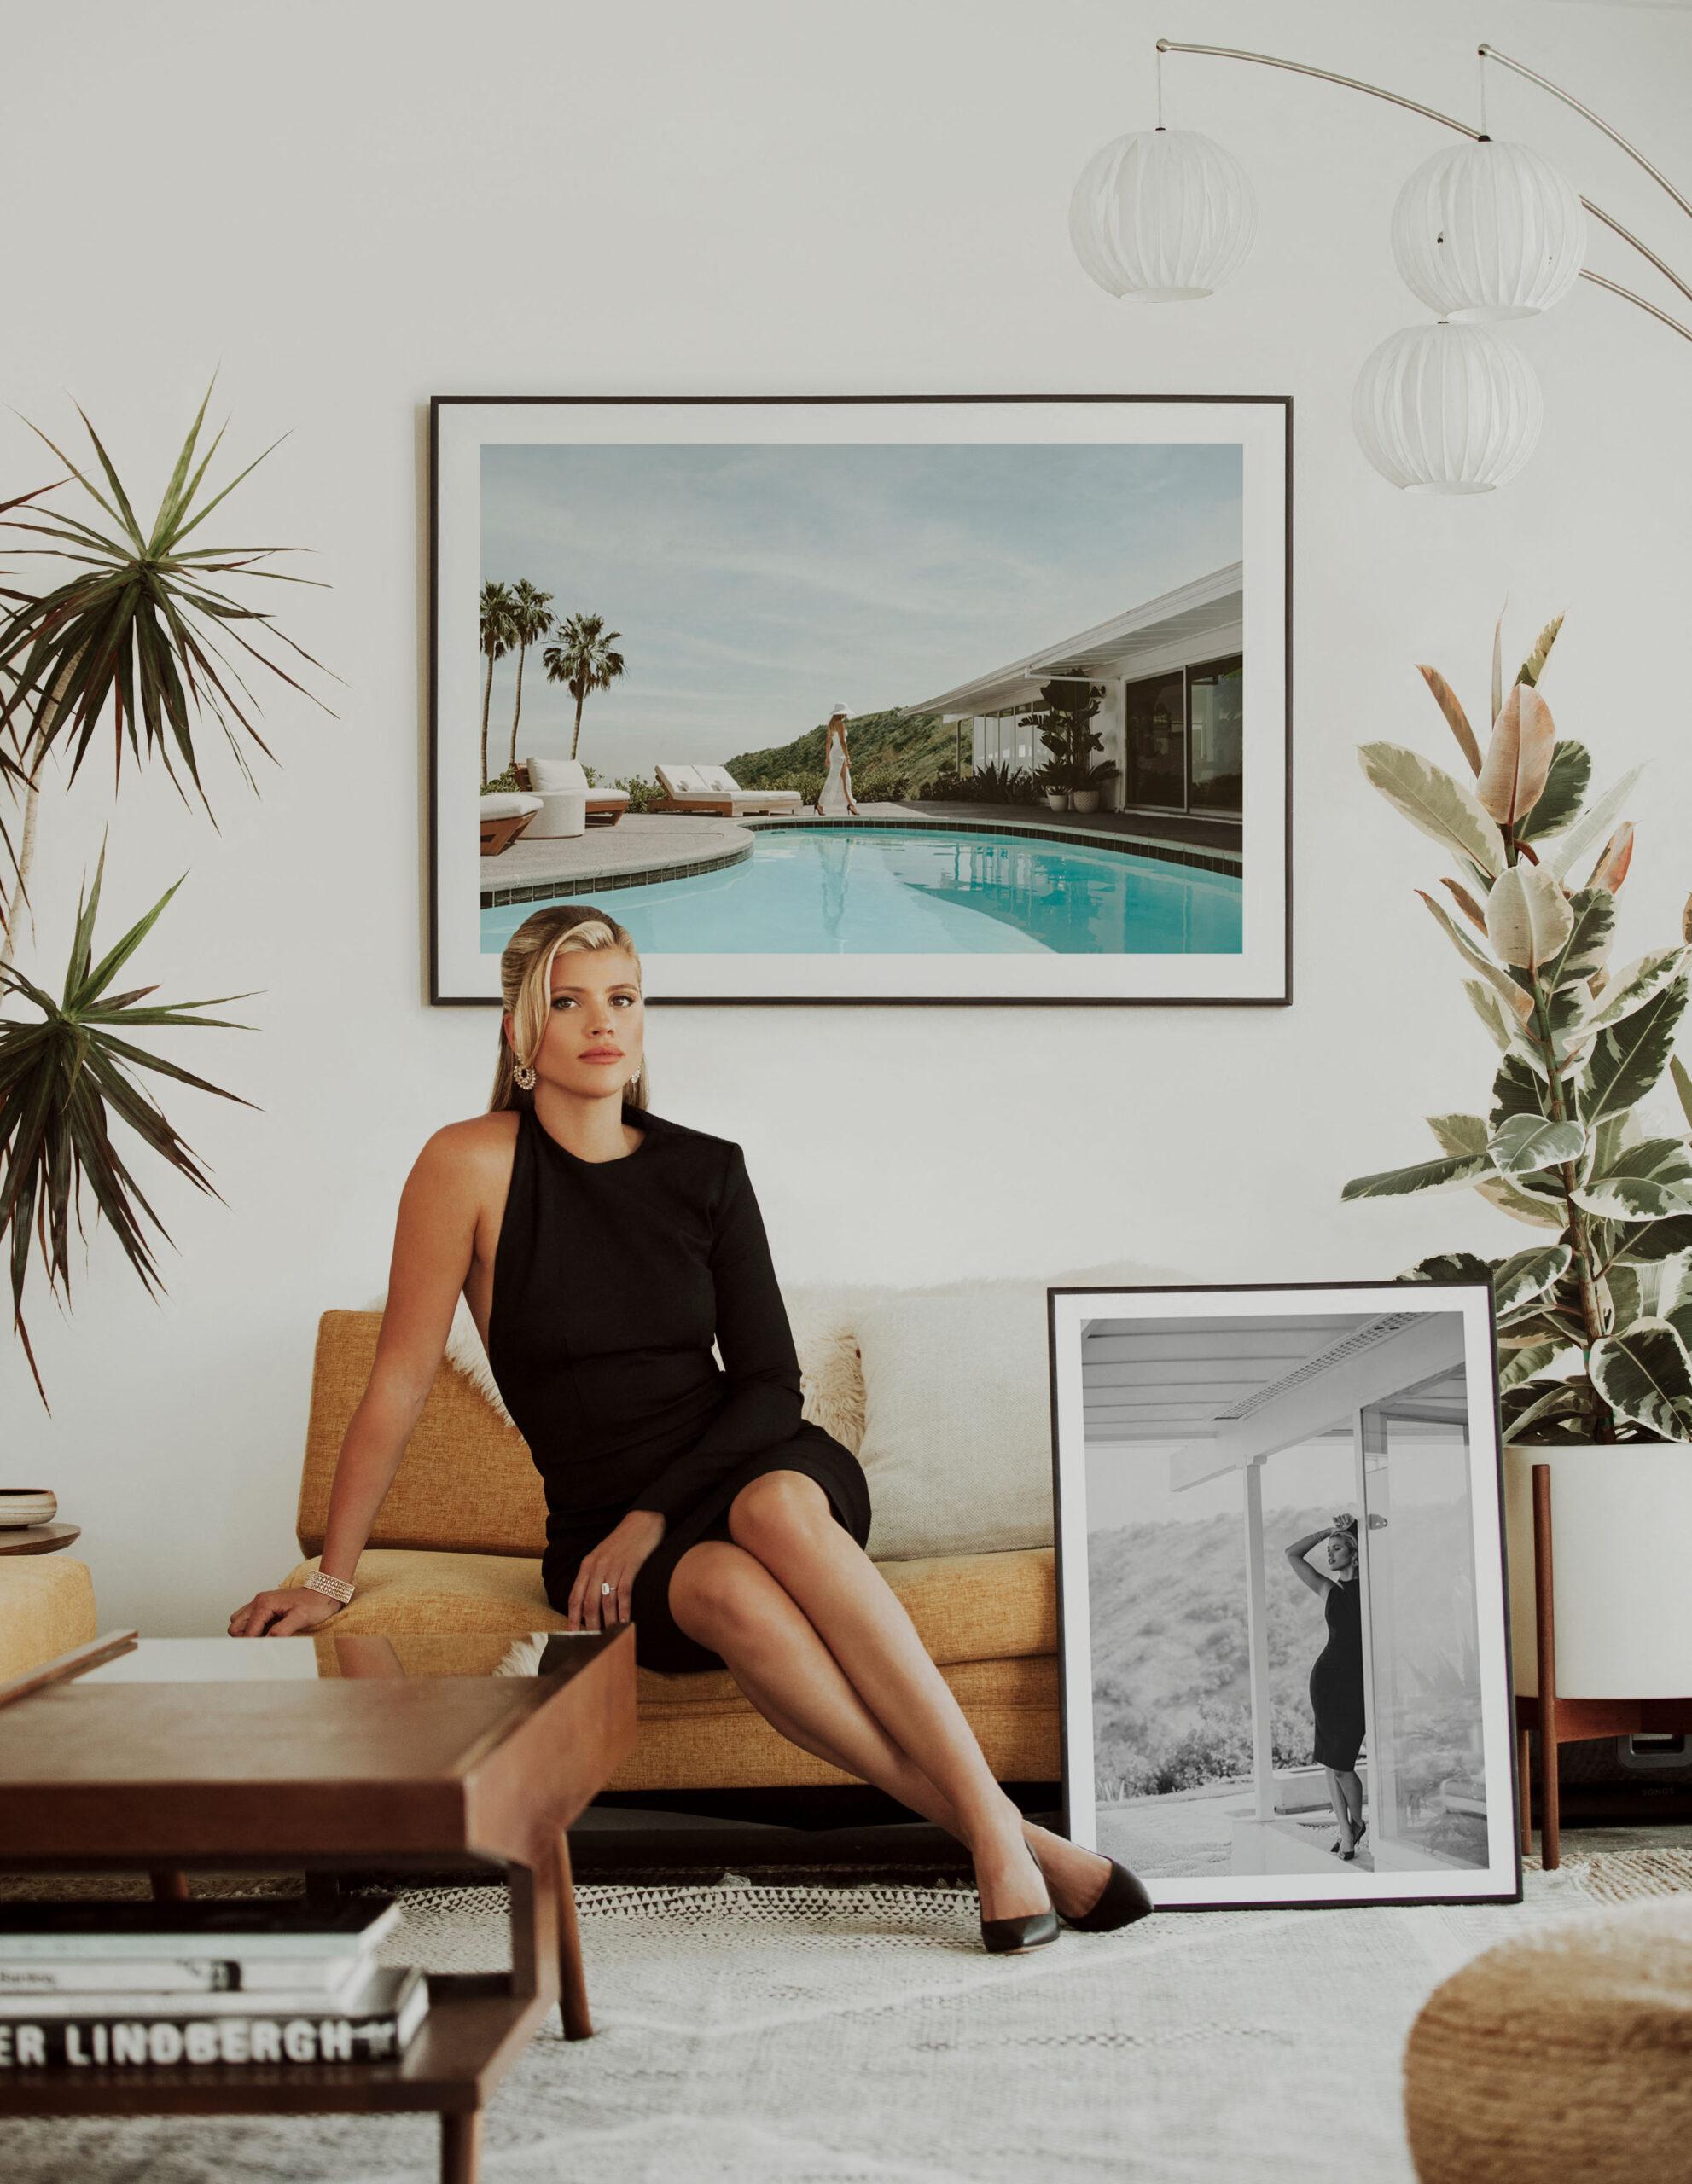 Sofia Richie is bringing a touch of classic Hollywood glamour to homes with a new photo art prints collection. The model stars in the “Studio Hollywood” collection from Desenio, posing by a pool in a white swimsuit in some of the spectacular shots. The collection of 26 photographs is “inspired by the elegance of old Hollywood” and along with Sofia showcases poolside views, mid-century modern architecture, timeless fashion looks and luxury details. It was shot in Los Angeles and Palm Springs and “tells the story of living your dreams with iconic looks and views over Los Angeles,” according to Scandinavian wall art brand Desenio. Sofia said: “I loved the looks we went for during this shoot; I have a huge love for fashion, so it’s always so fun to be able to experiment with clothes and makeup. “Growing up with my mother, who had a fashion line at the time, definitely piqued my interest in fashion. It runs in the family.” She added: “I would say my interior style is traditional and timeless; that’s why I was so excited to do this collection with Desenio. “I love the color palette of beige, brown, and turquoise mixed with the classic black and white photography. It goes really nicely with my home and style.” Studio Hollywood is available to buy from www.desenio.com *BYLINE: Courtesy of Desenio/Mega. 20 Oct 2022 Pictured: Sofia Richie is bringing a touch of classic Hollywood glamour to homes with new Desenio photo art prints collection “Studio Hollywood”. *BYLINE: Courtesy of Desenio/Mega. Photo credit: Courtesy of Desenio/Mega TheMegaAgency.com +1 888 505 6342 (Mega Agency TagID: MEGA909717_002.jpg) [Photo via Mega Agency]